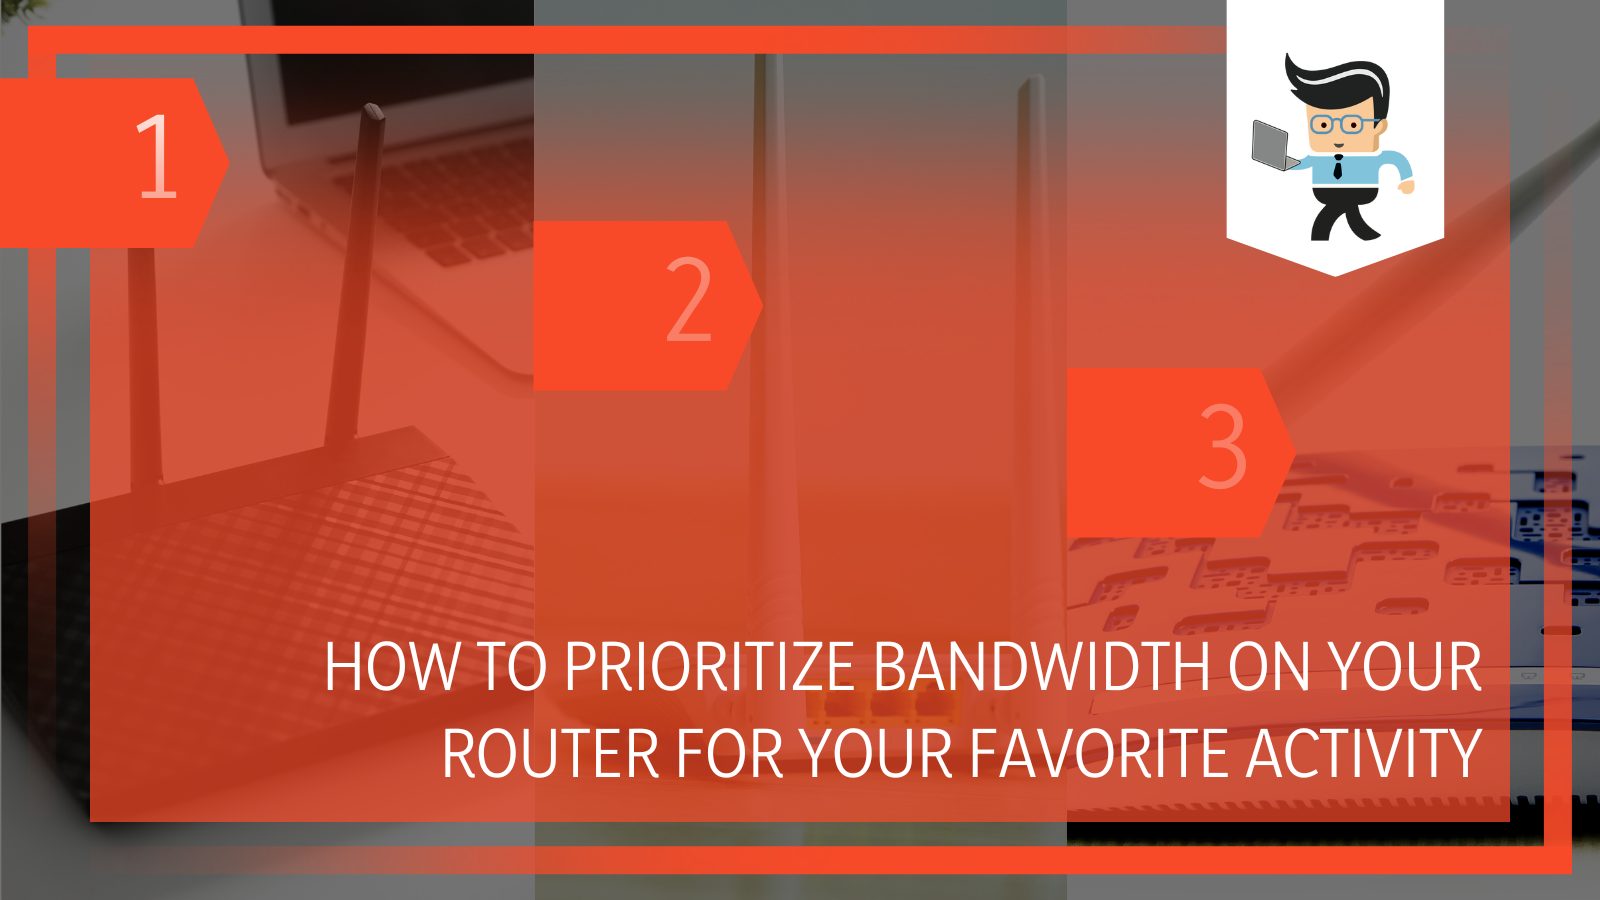 Prioritize Bandwidth on Your Router